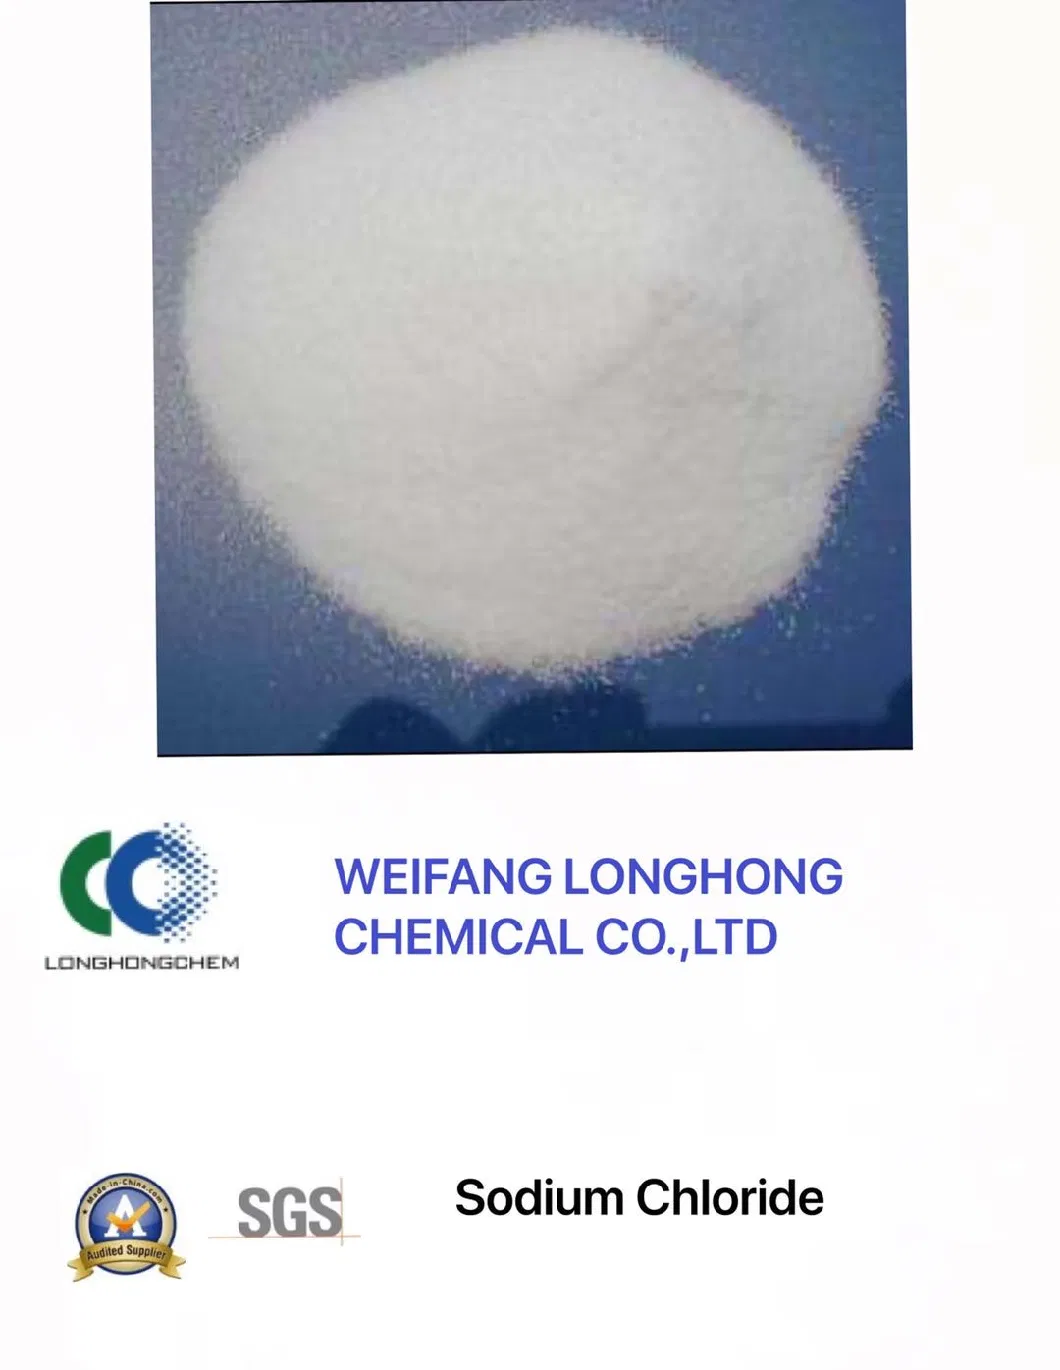 Top Quality Snow-Melting Agent Used for Reduce The Melting Temperature of Snow and Ice/Unblock Roads